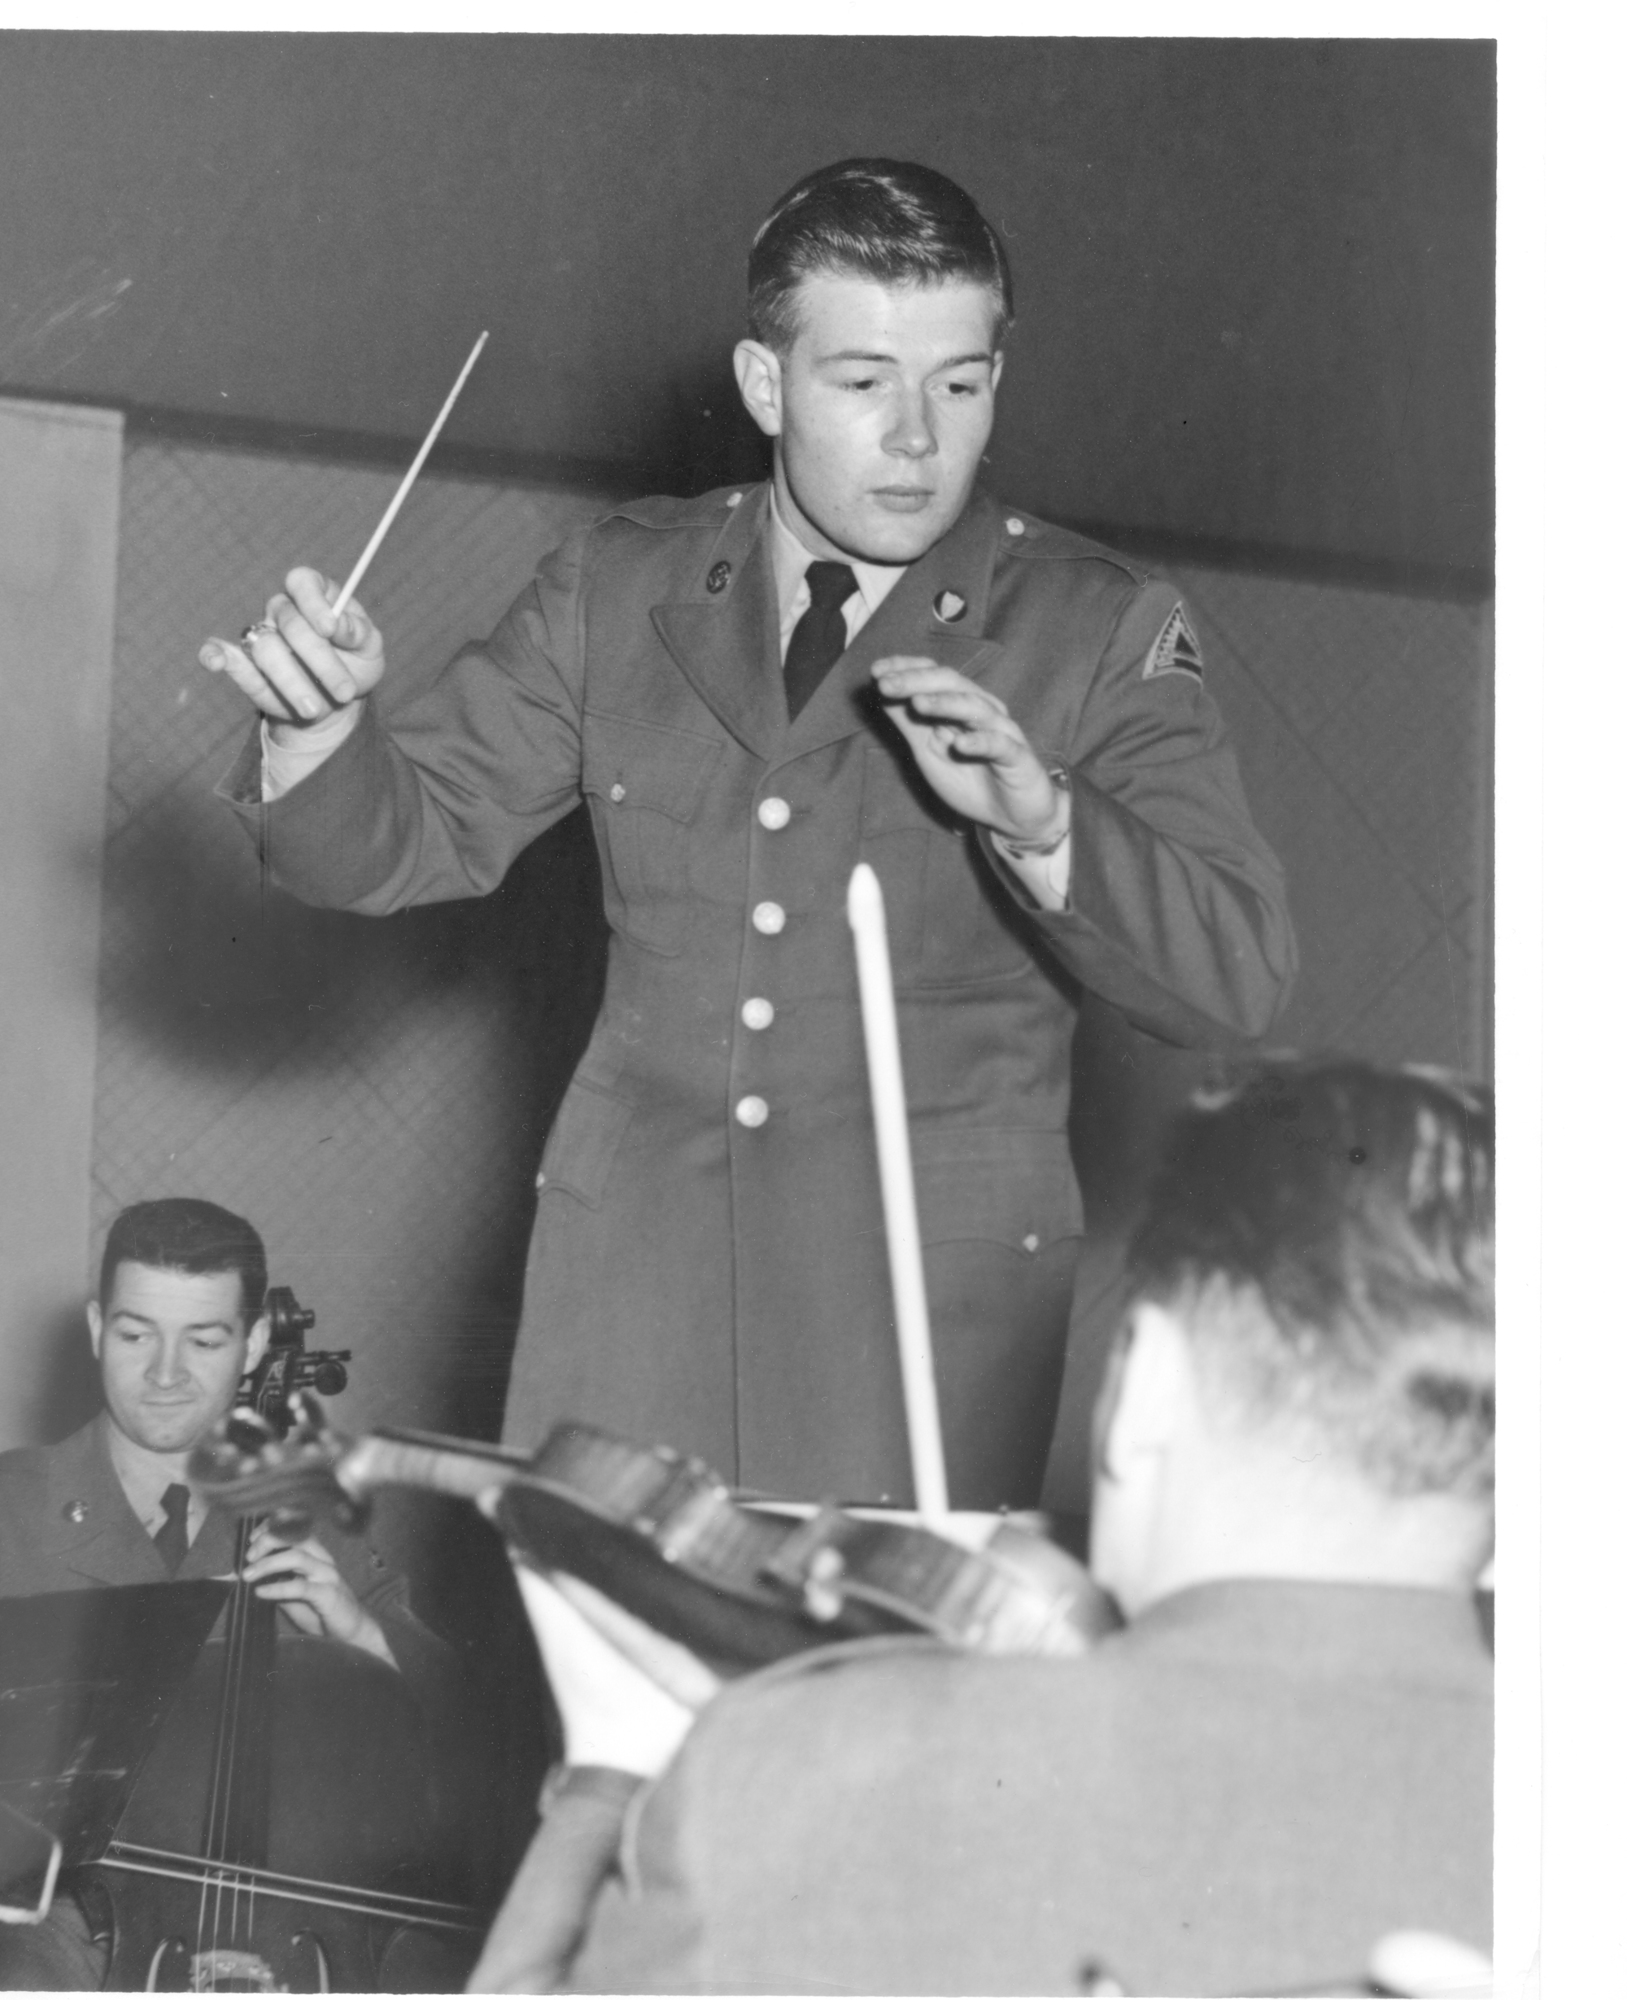 Edward Alley found himself the conductor of a full symphony orchestra at age 22.